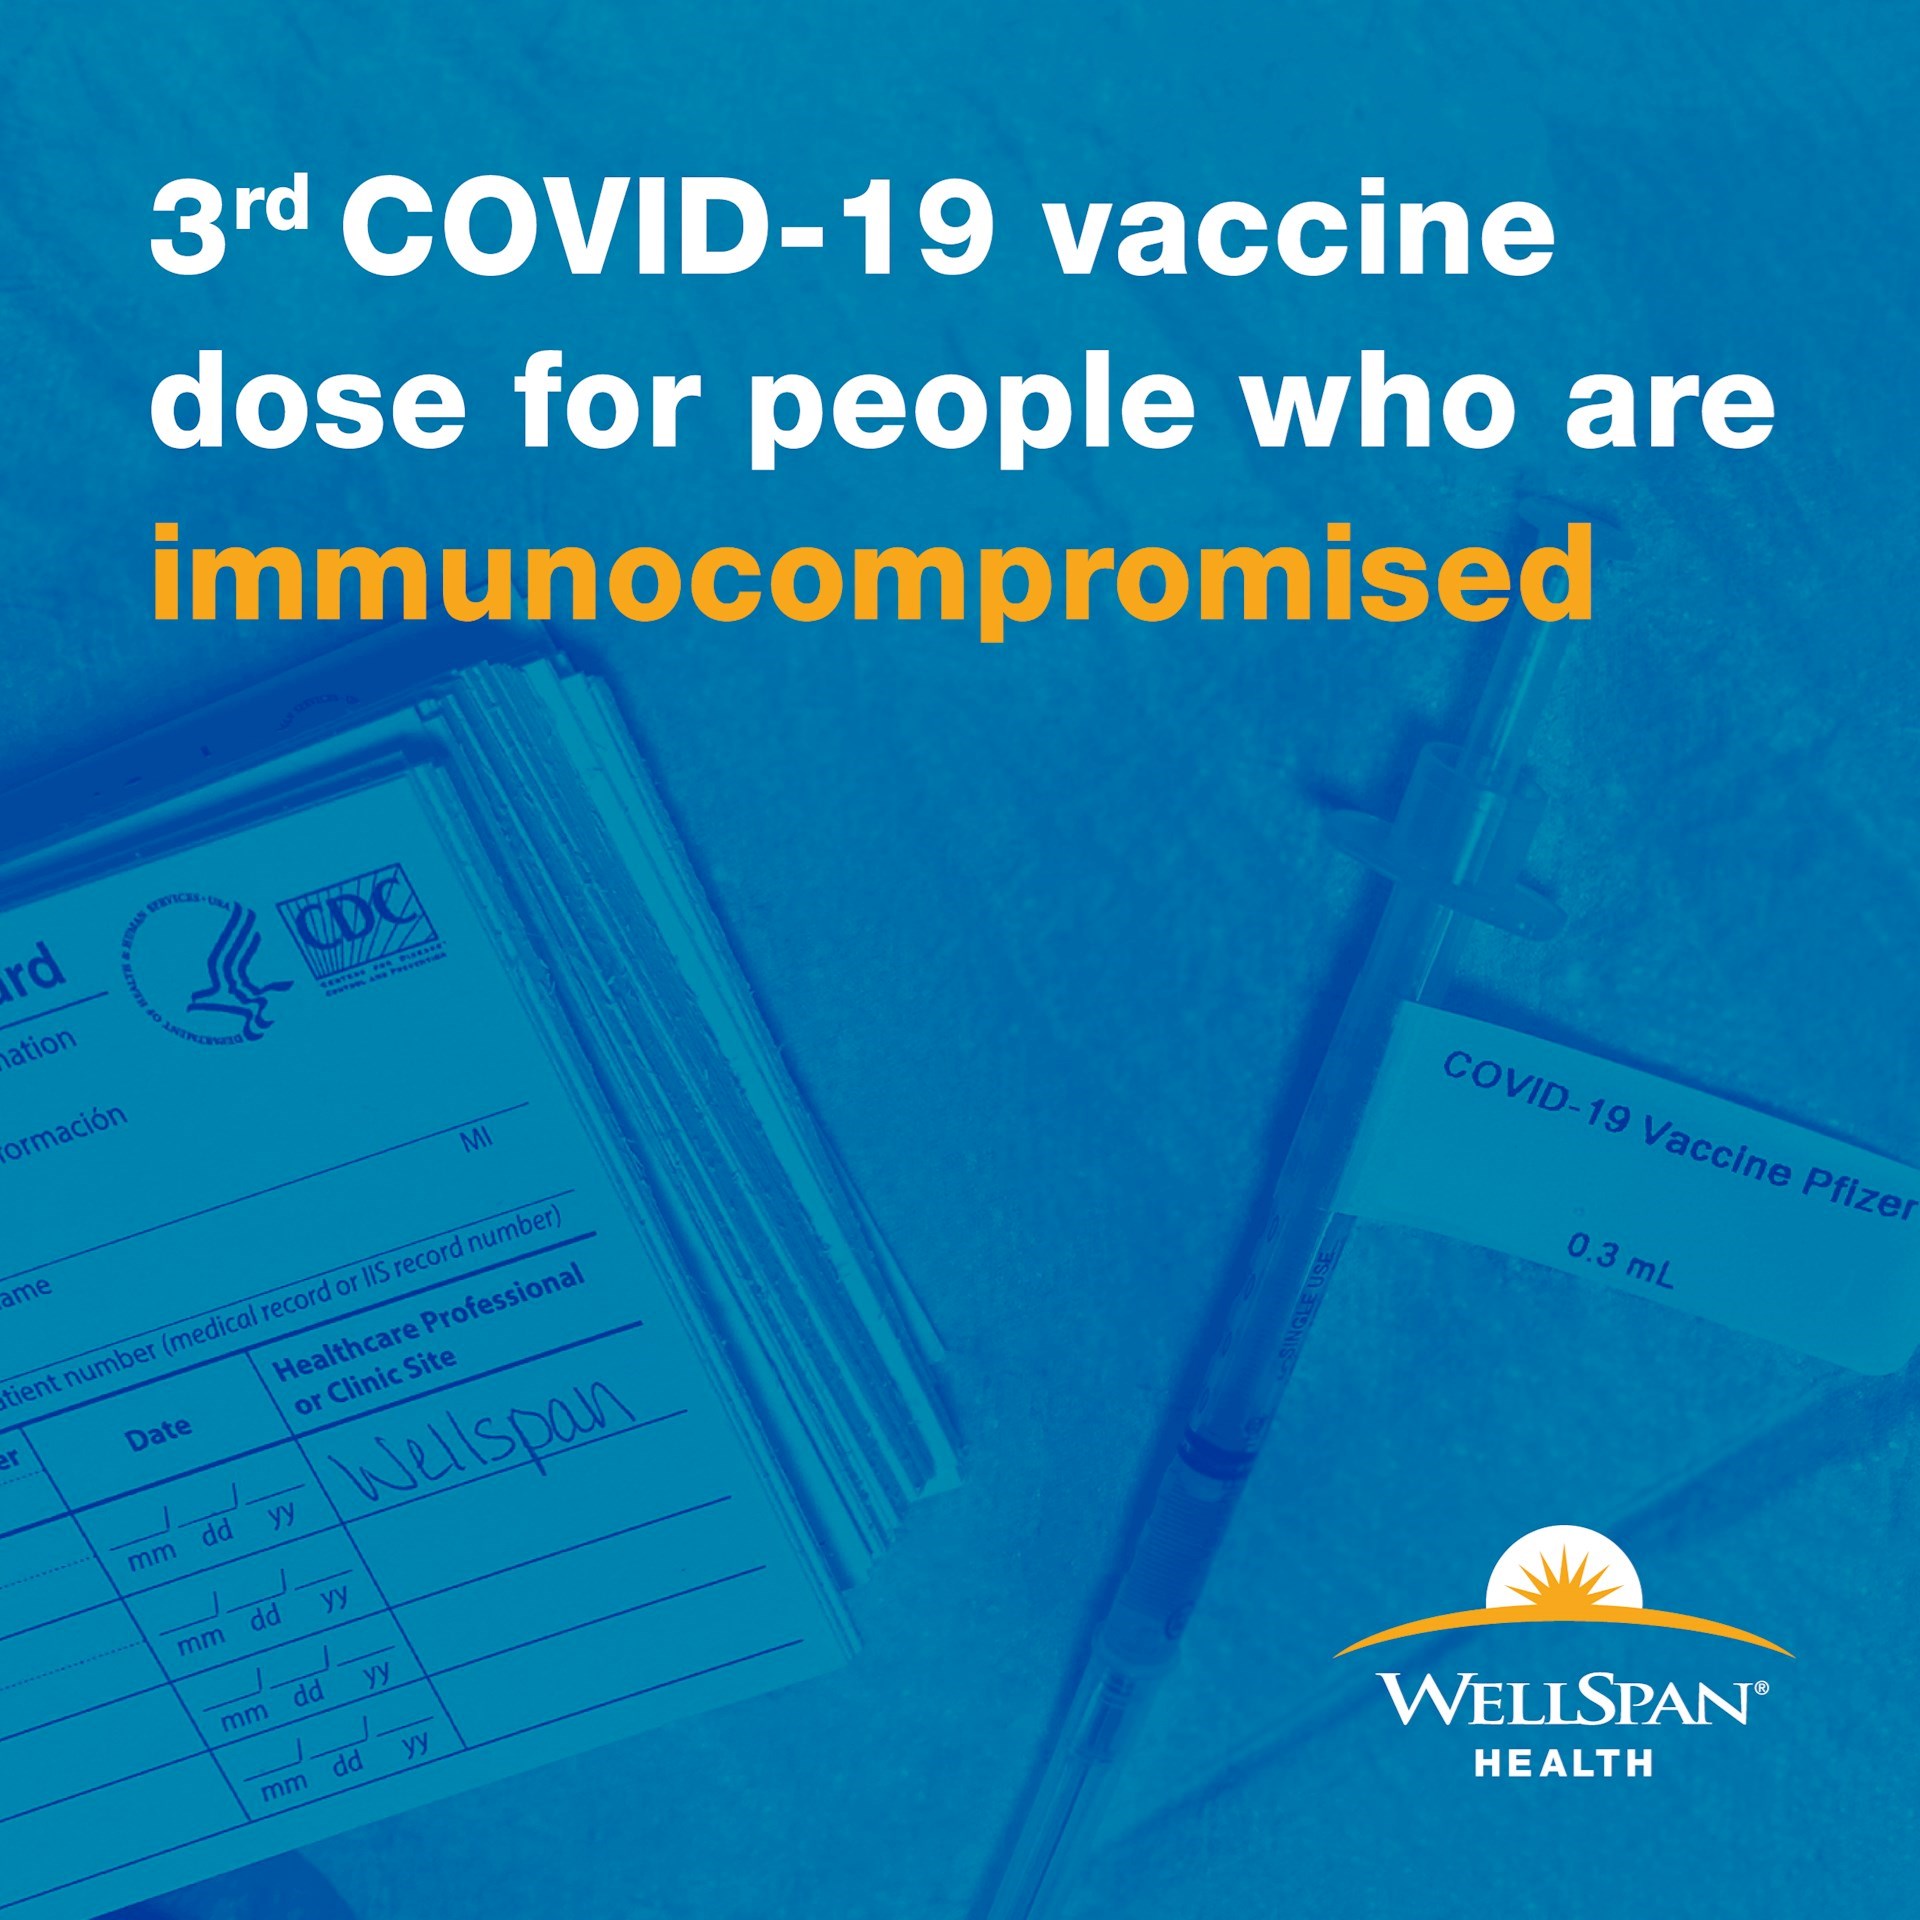 WellSpan is offering the third dose of the COVID-19 vaccine to people who are immunocompromised.